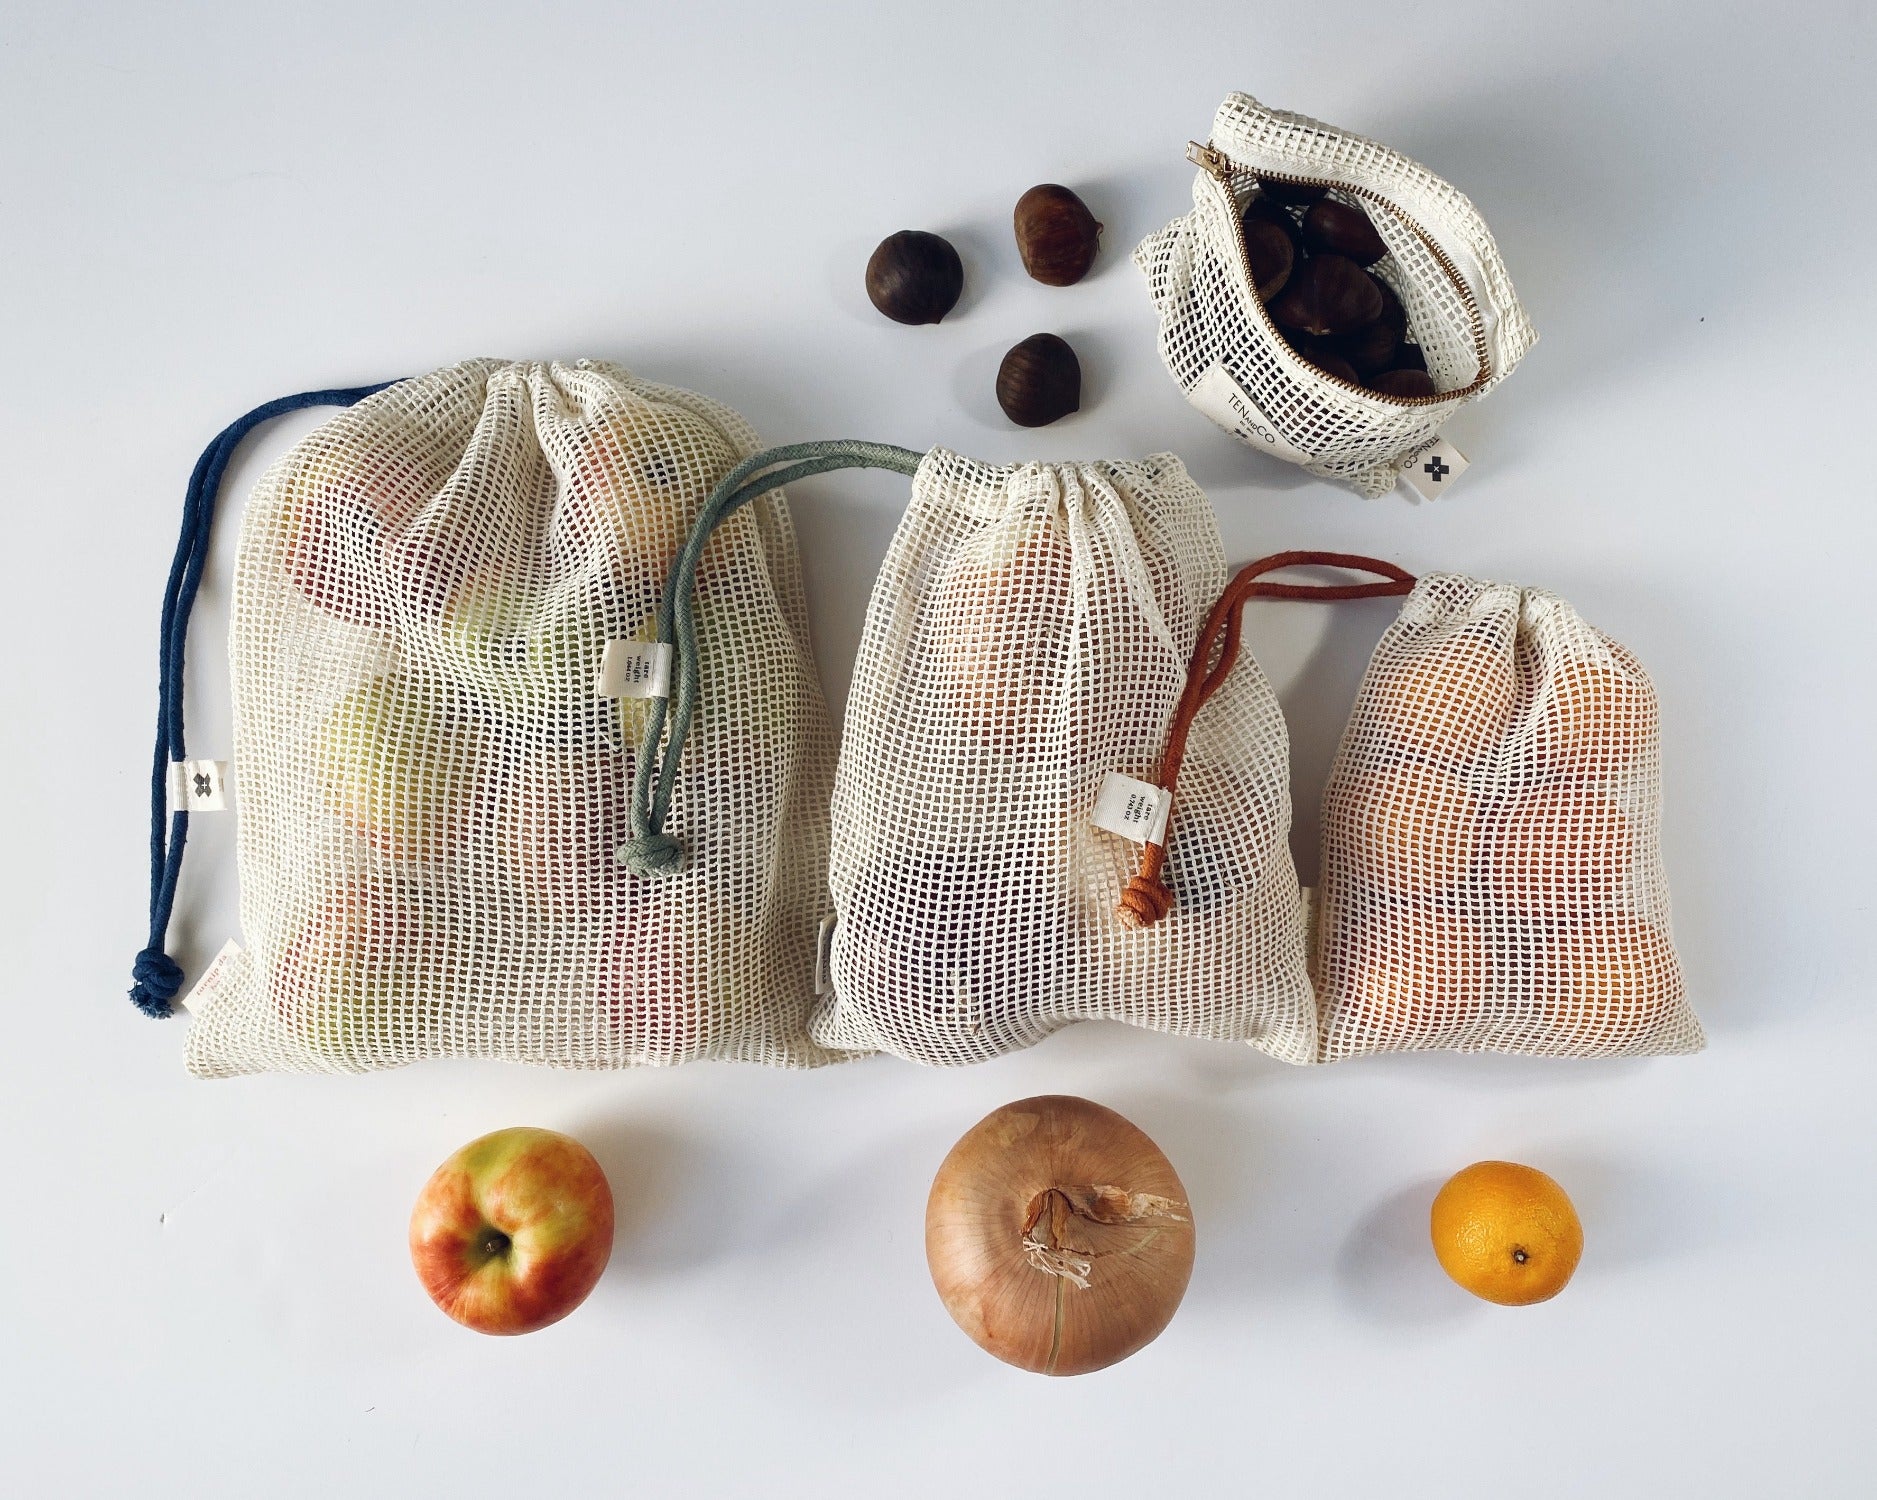 Flay lay image of Produce Bags on a white background. In this image there the 3 different sized produce bags each filled with different produce. There are apples, onions and clementines. There is also a small pouch that has figs in it and there are 3 sitting beside it.